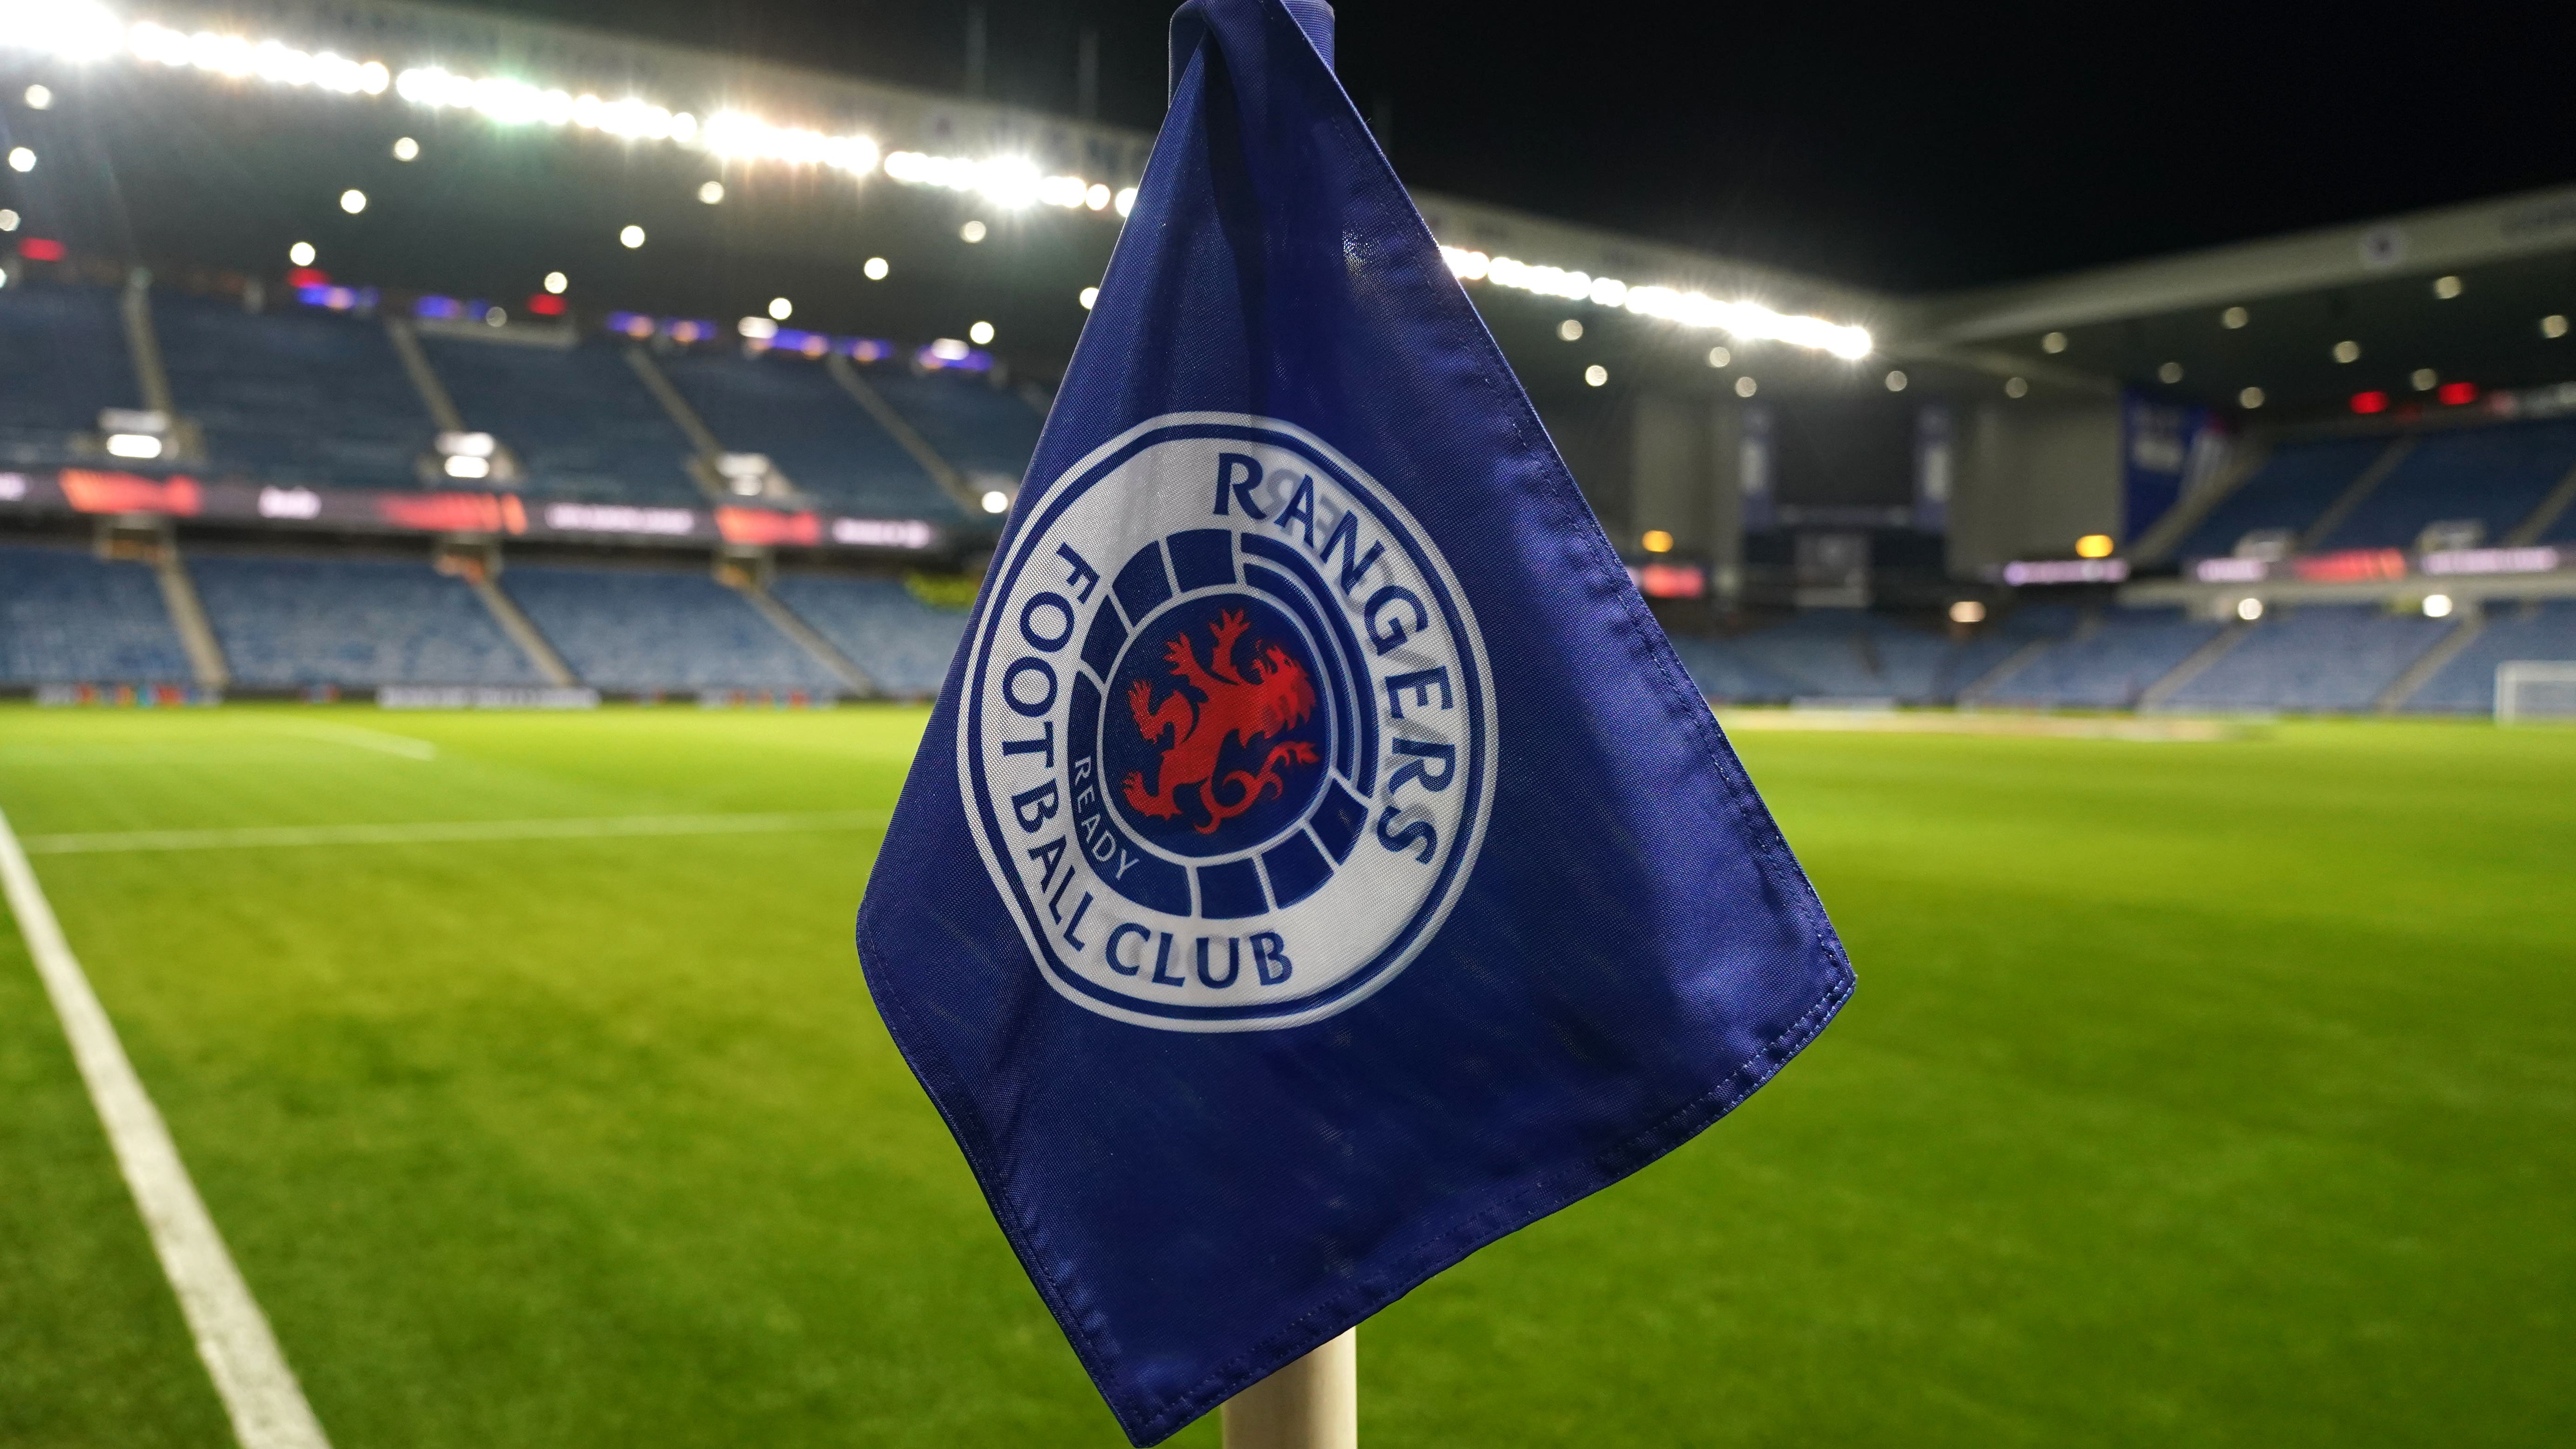 Extreme weather conditions force postponements at Rangers and Aberdeen